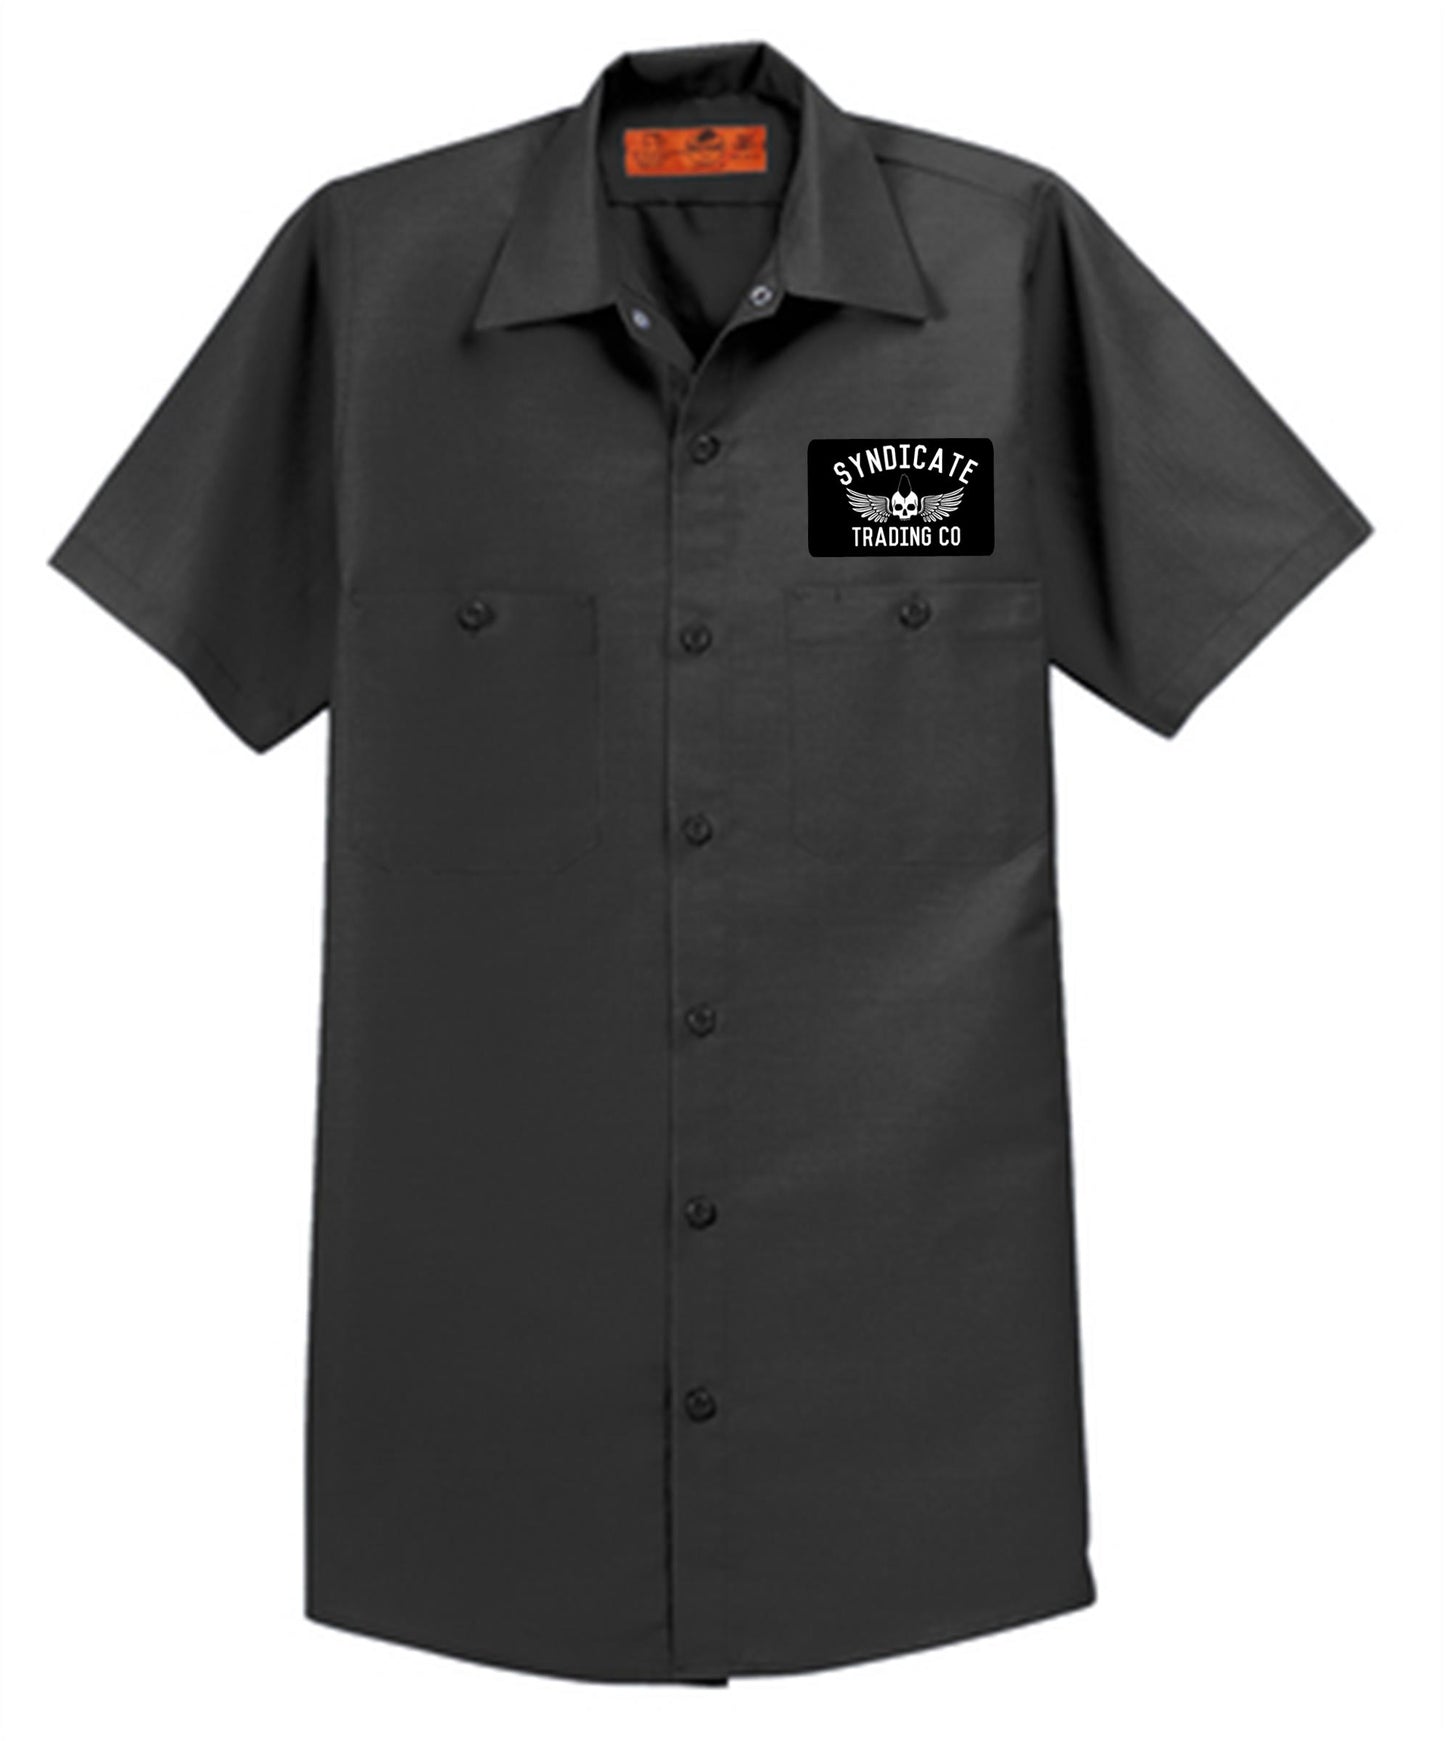 CLEARANCE SALE Syndicate Work Shirt